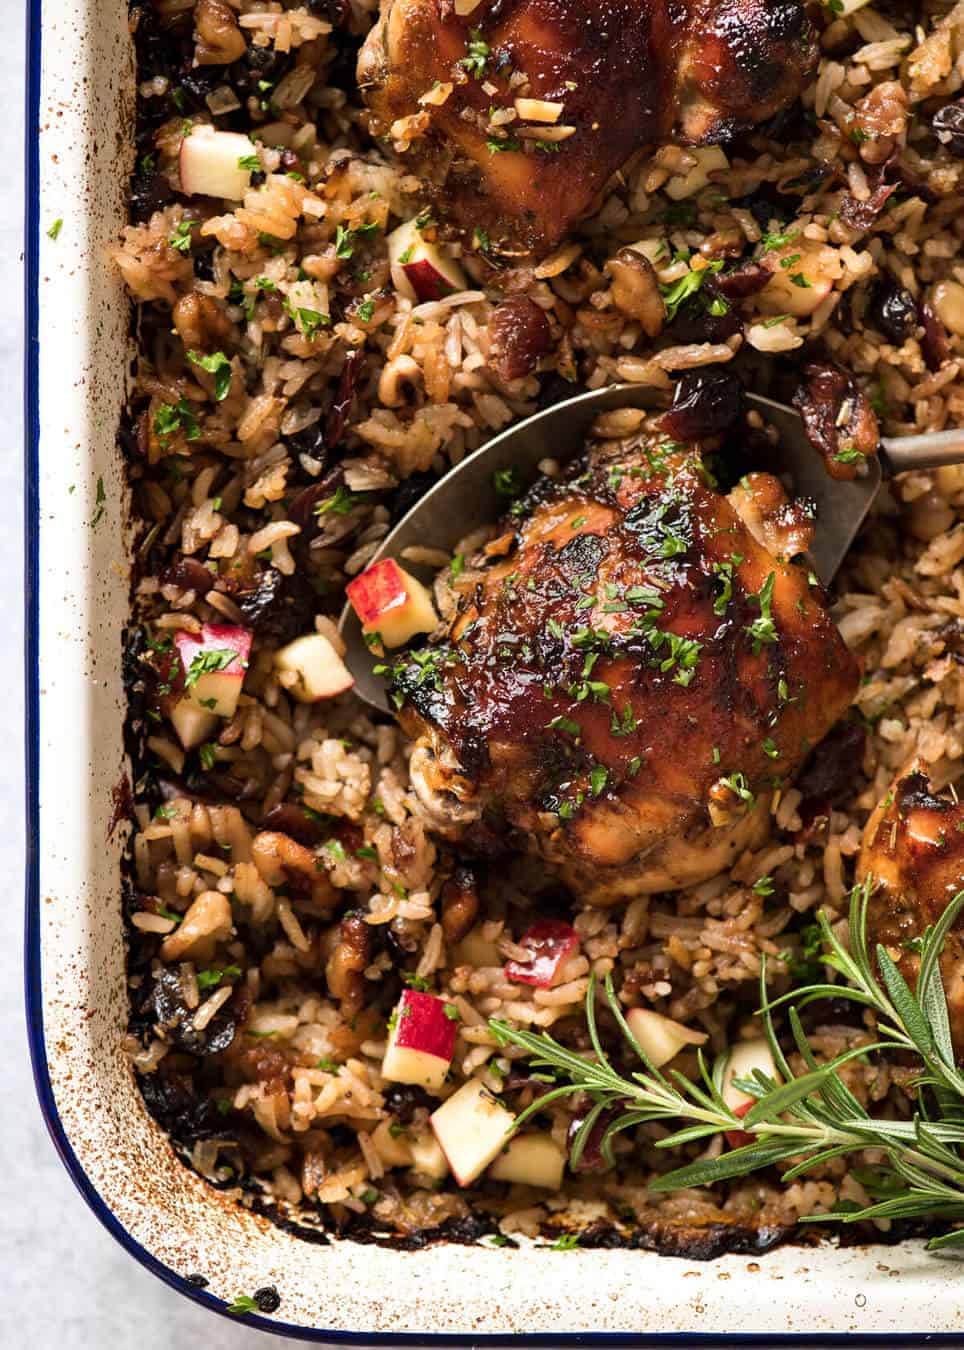 A flavour loaded one-pan, quick midweek dinner - Baked Chicken and Rice Pilaf with Cranberries, Walnuts and Apple. The smell when this is cooking is amazing! www.recipetineats.com